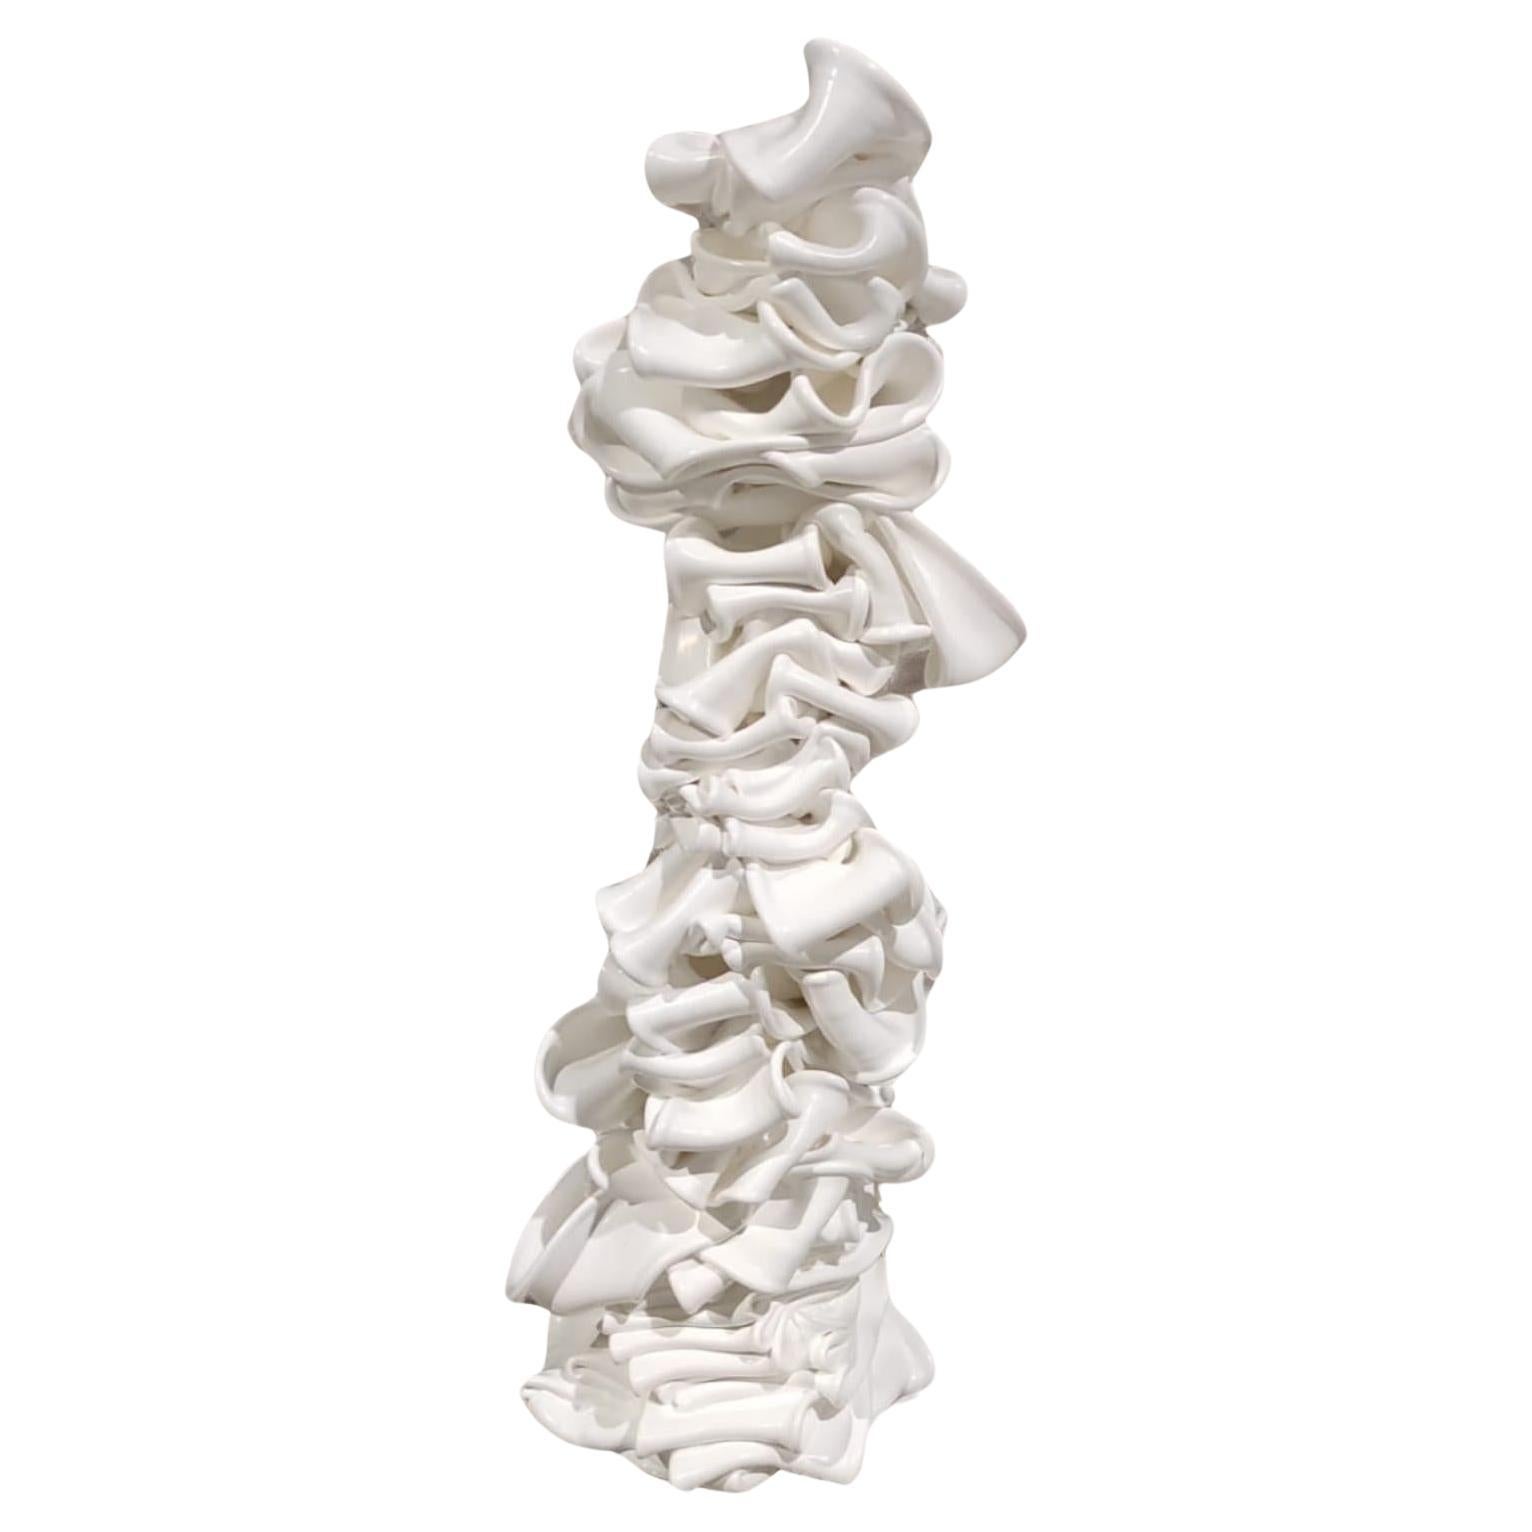 Spectacular Abstract Plastic Totem Single Piece Available at Auction